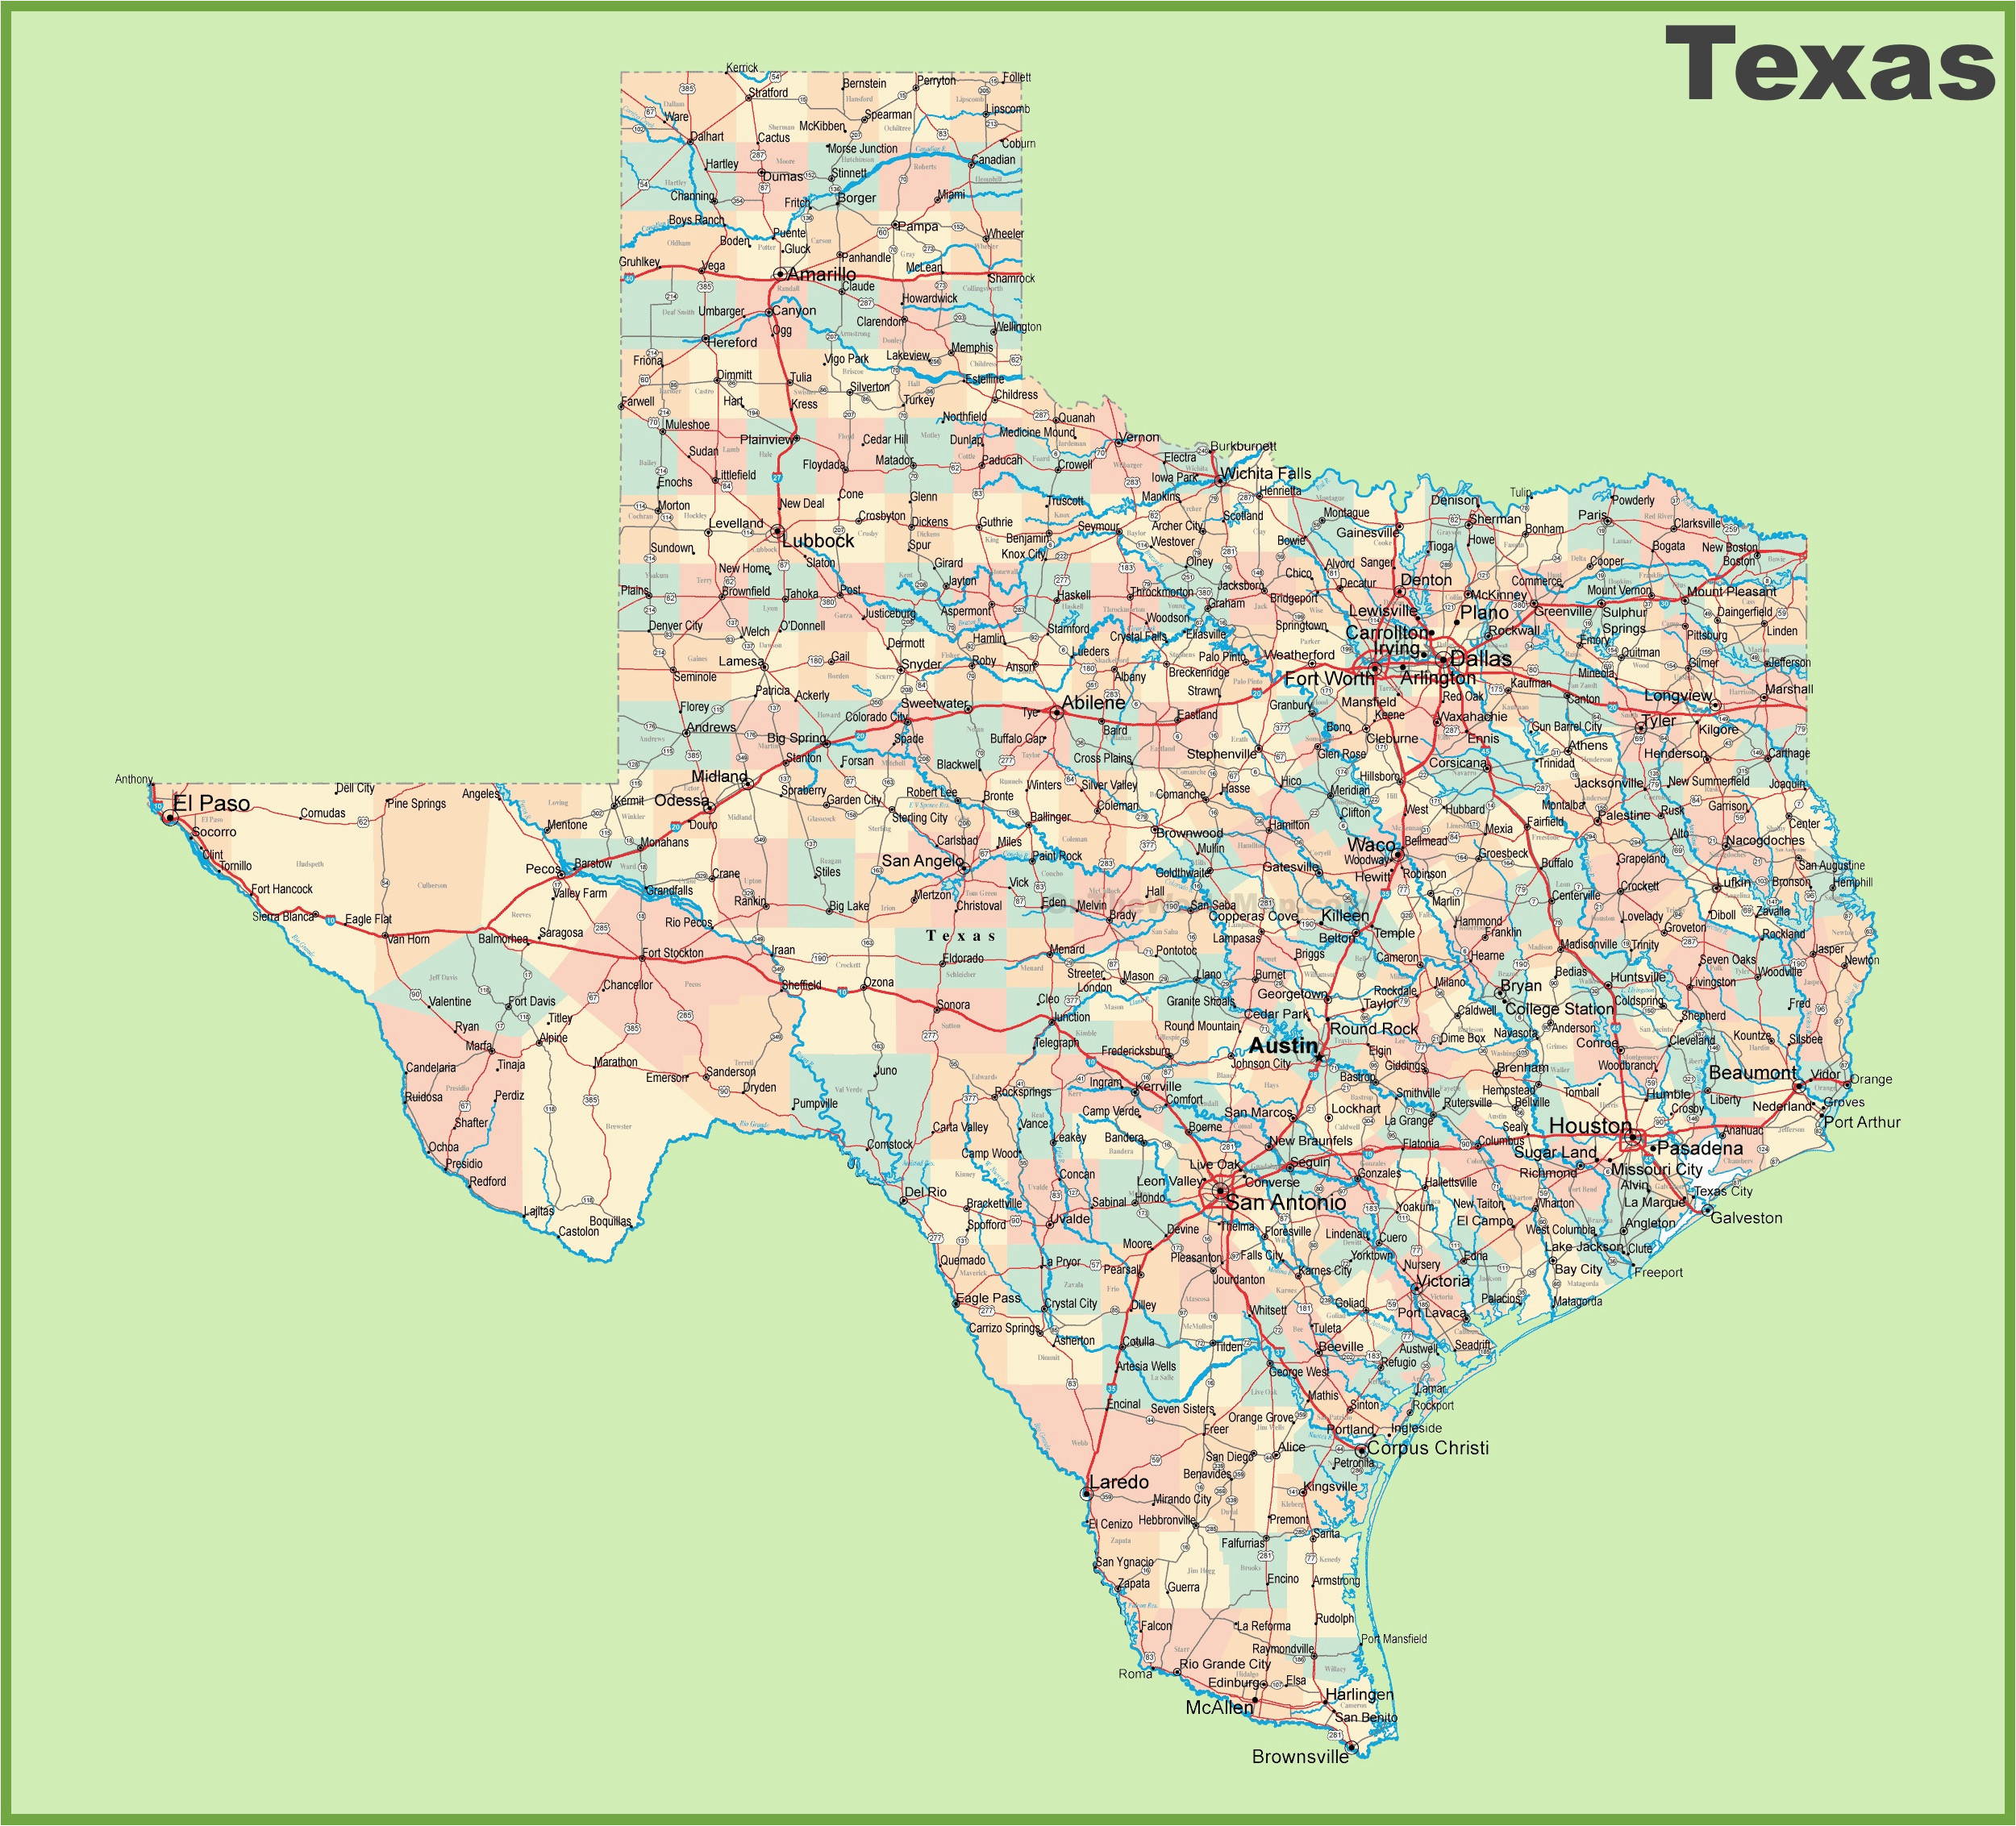 Texas Map with Counties and Cities Road Map Of Texas with Cities